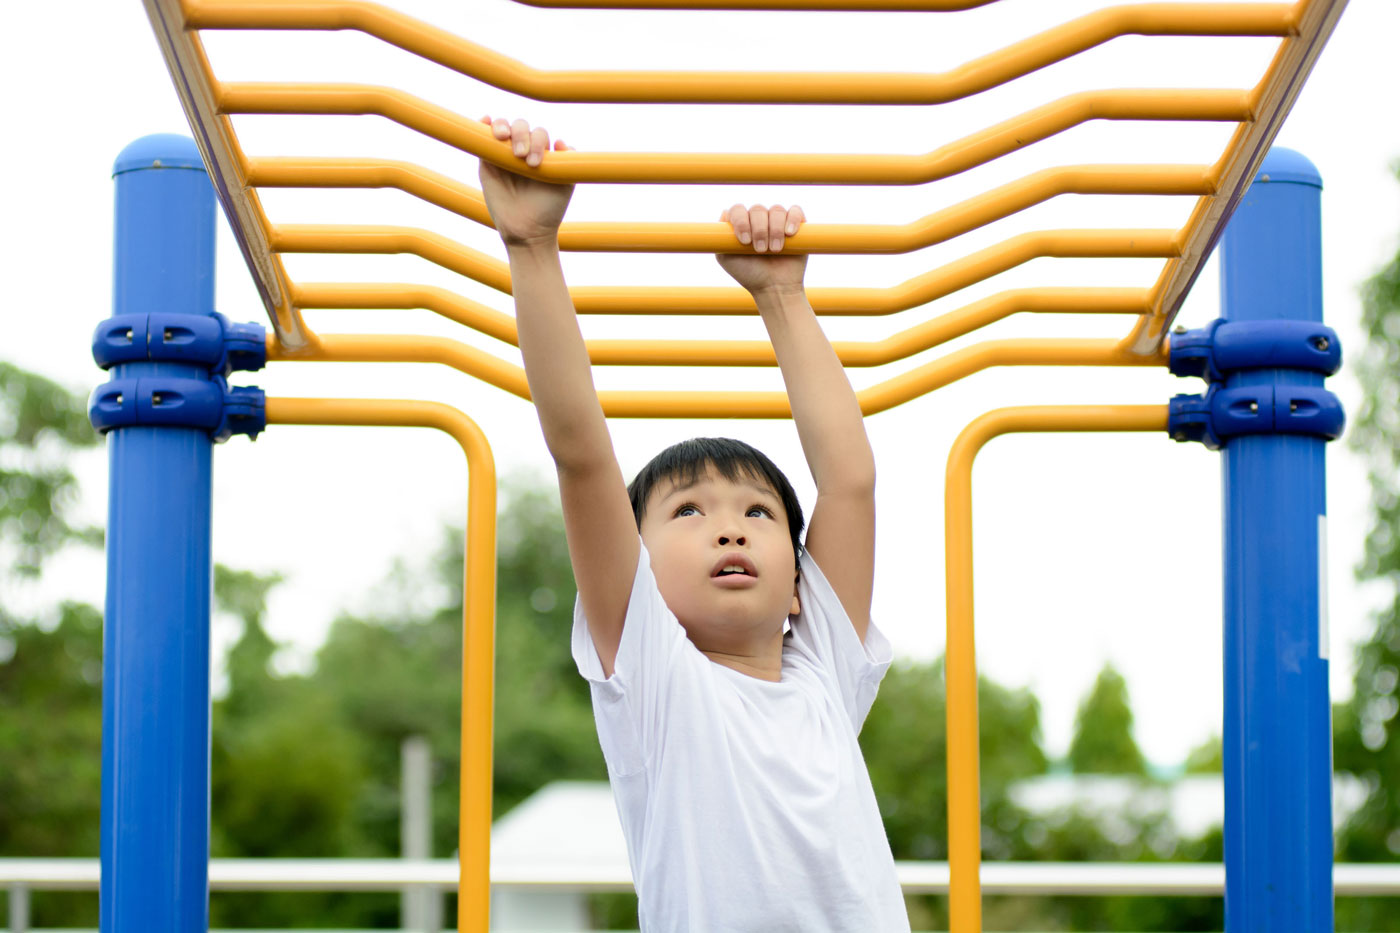 residents with kids at Watershed's new townhome community can enjoy the playgrounds